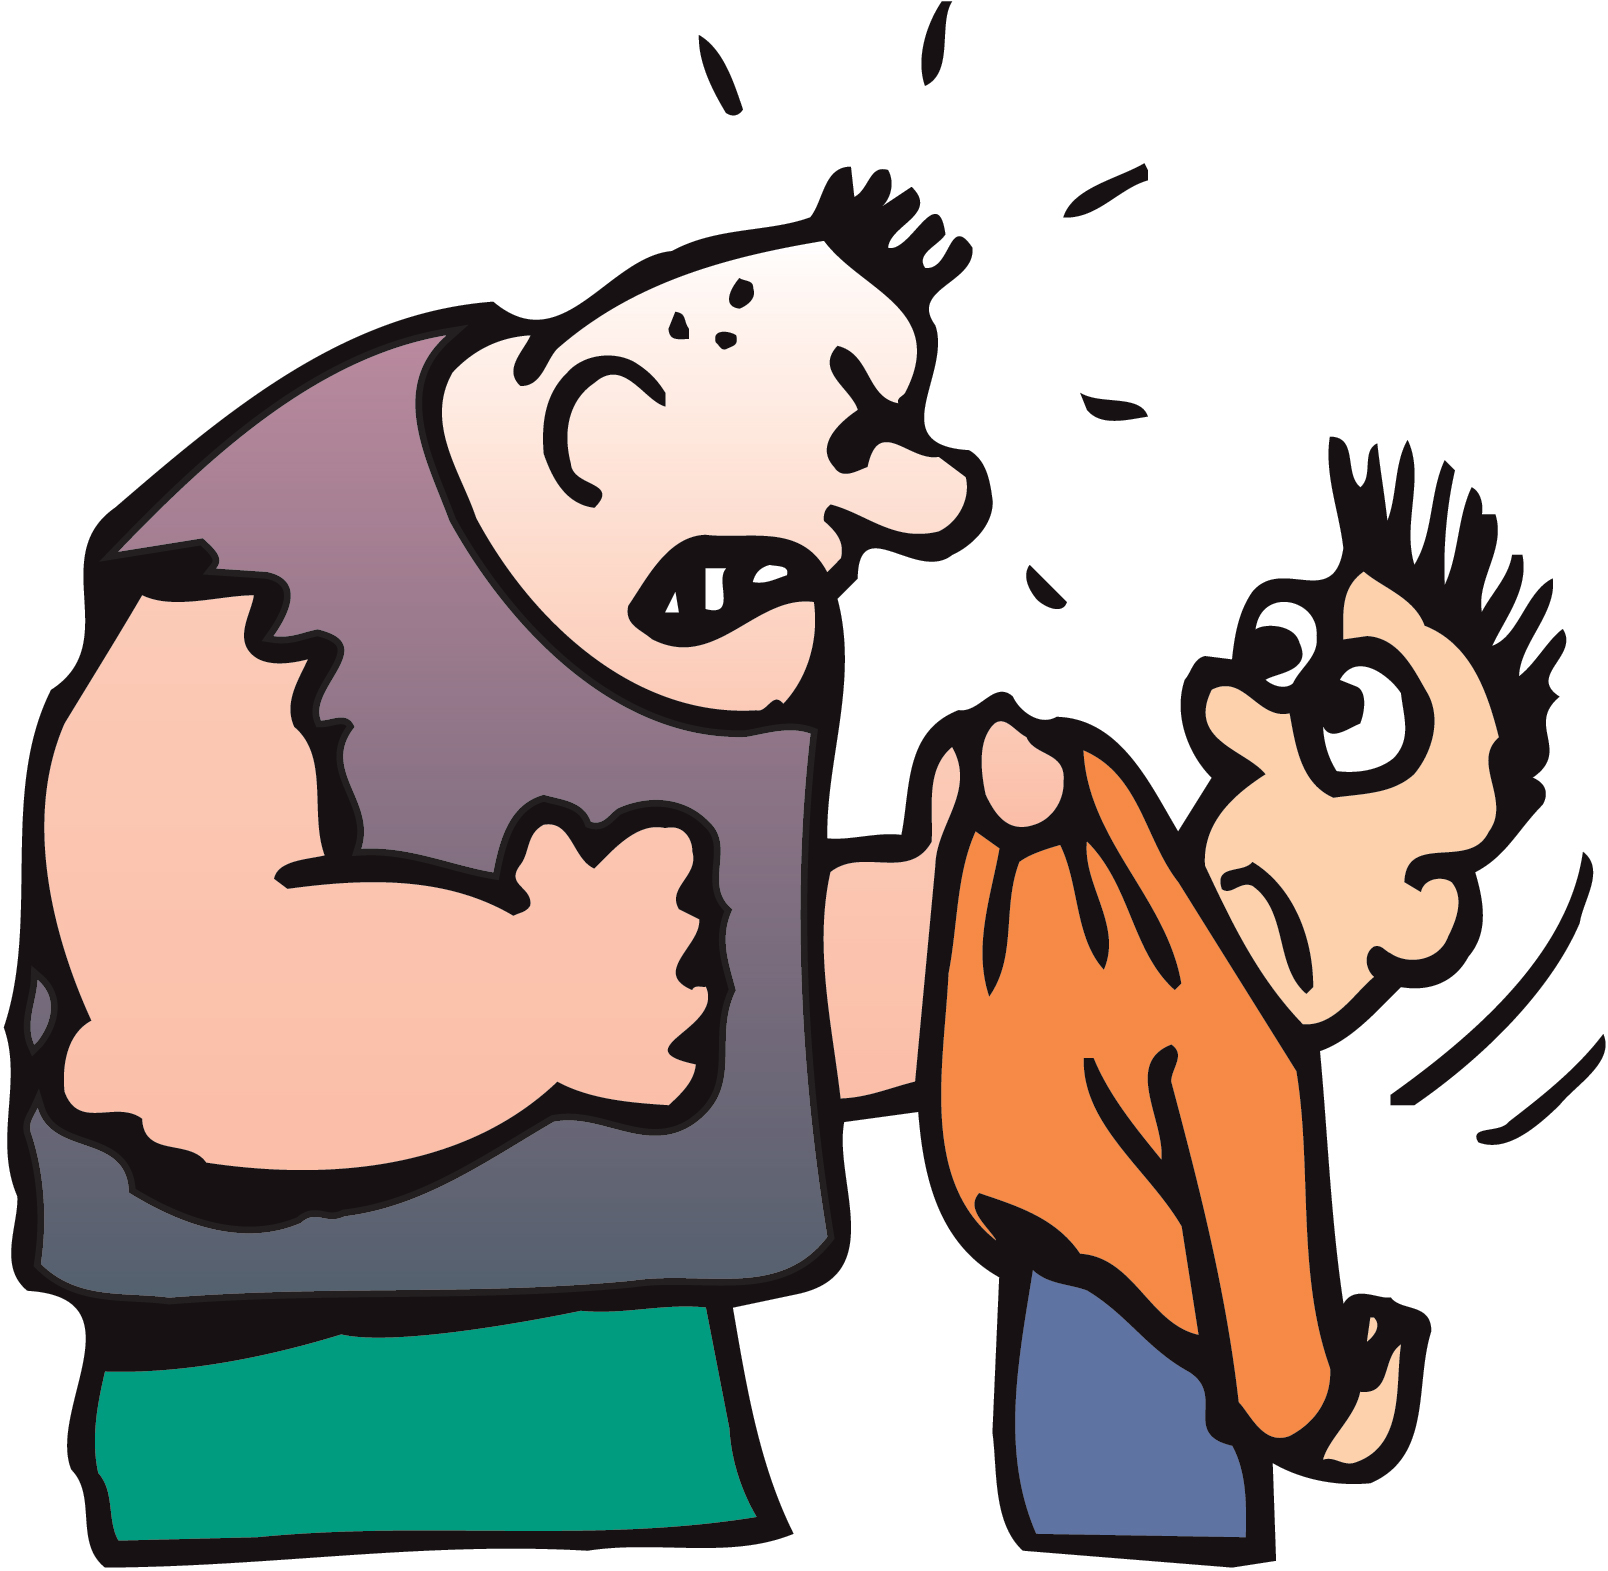 Free Bully Cartoon Pictures, Download Free Bully Cartoon Pictures png